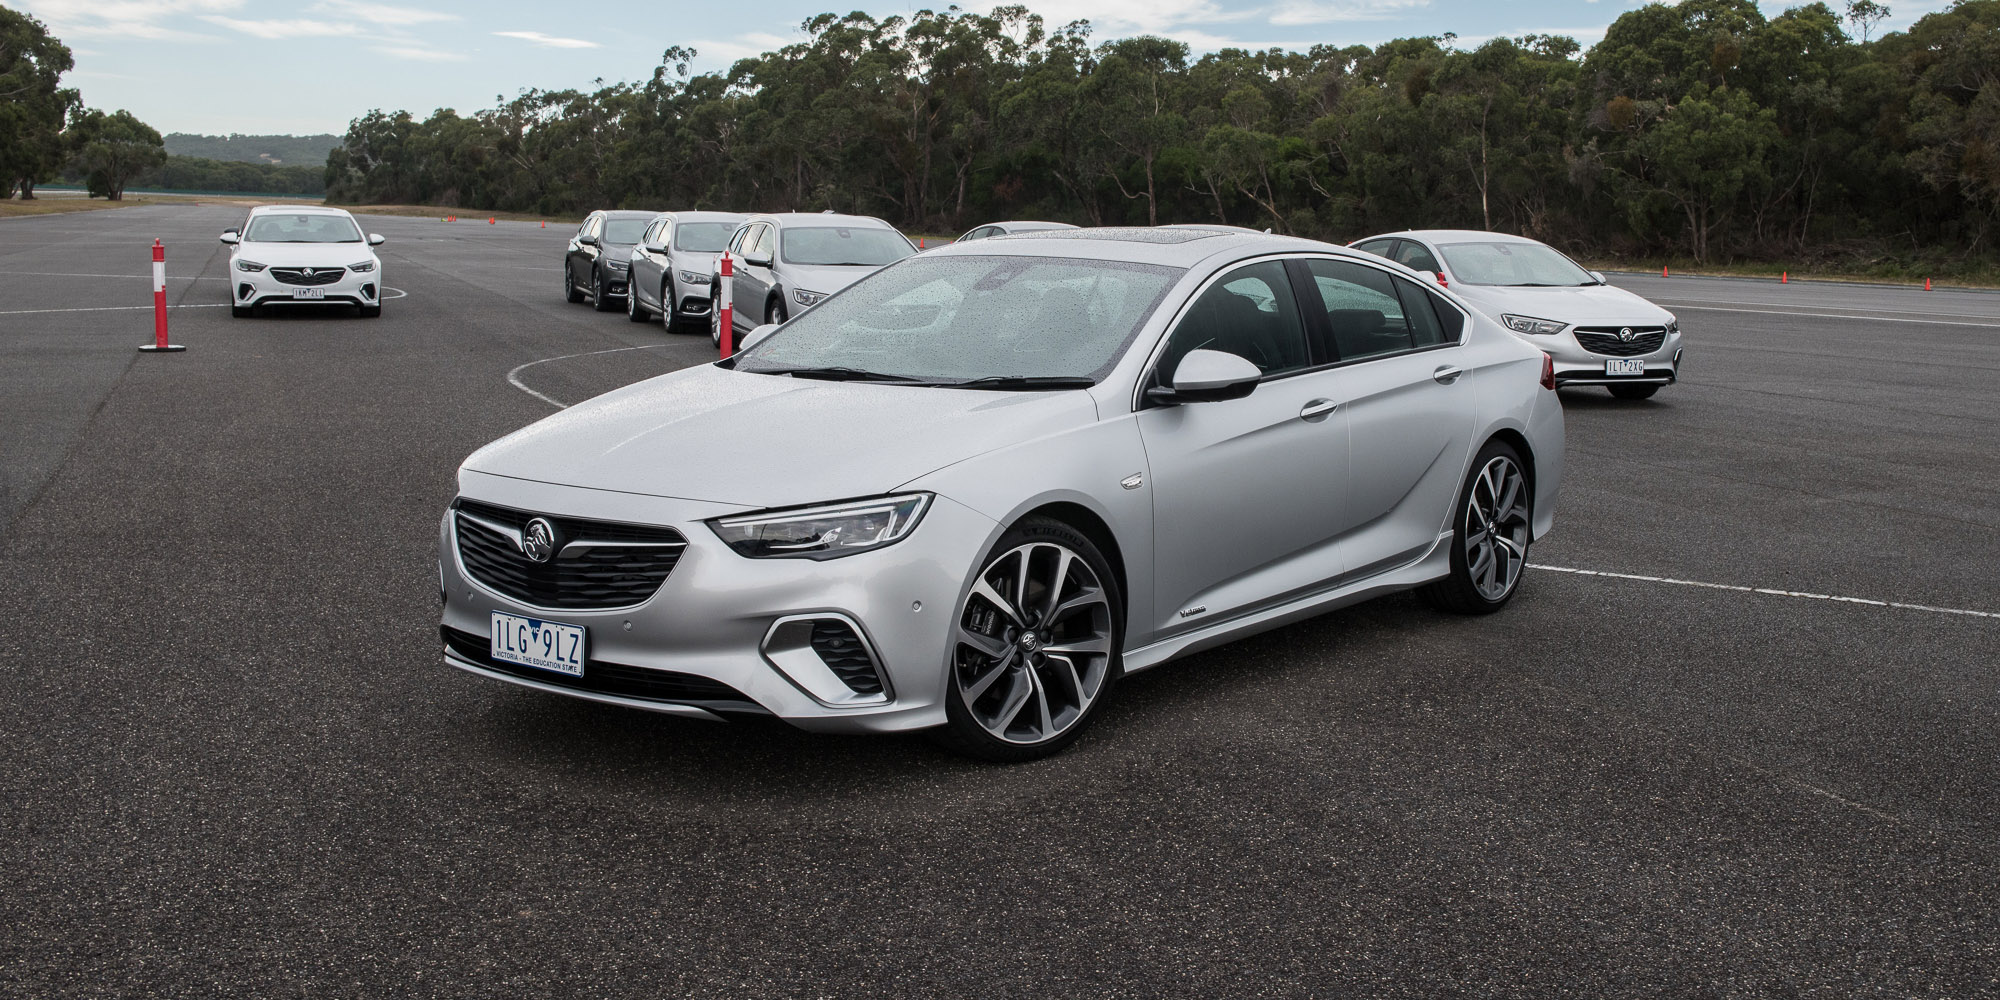 2018 Holden Commodore: CarAdvice reader drive day - Photos